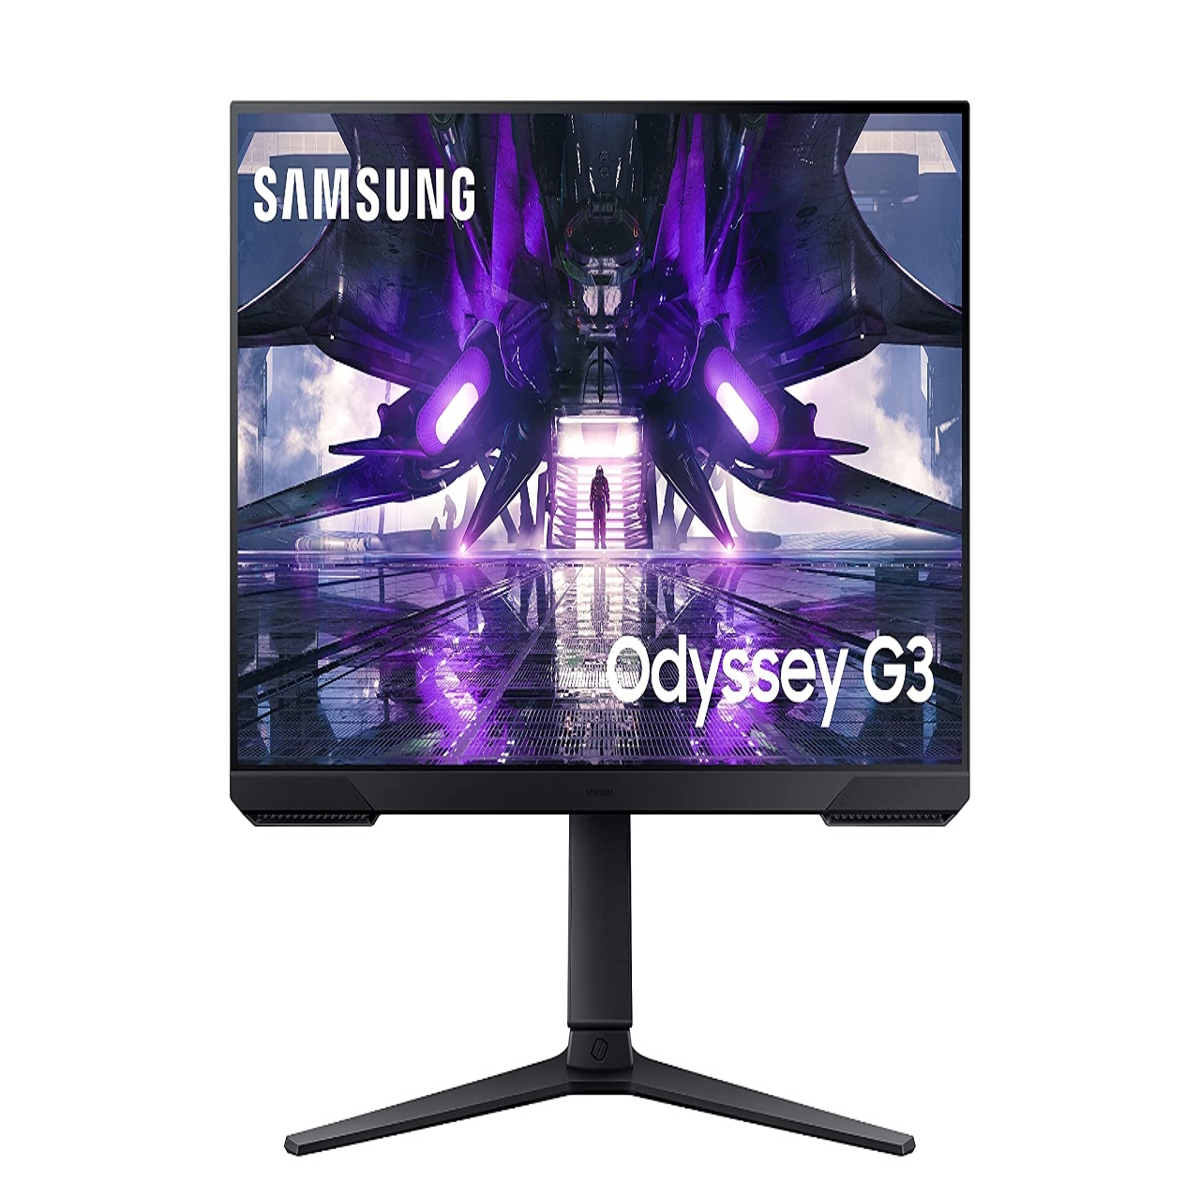 Competitive Samsung Odyssey G3 gaming monitor gets price cut in